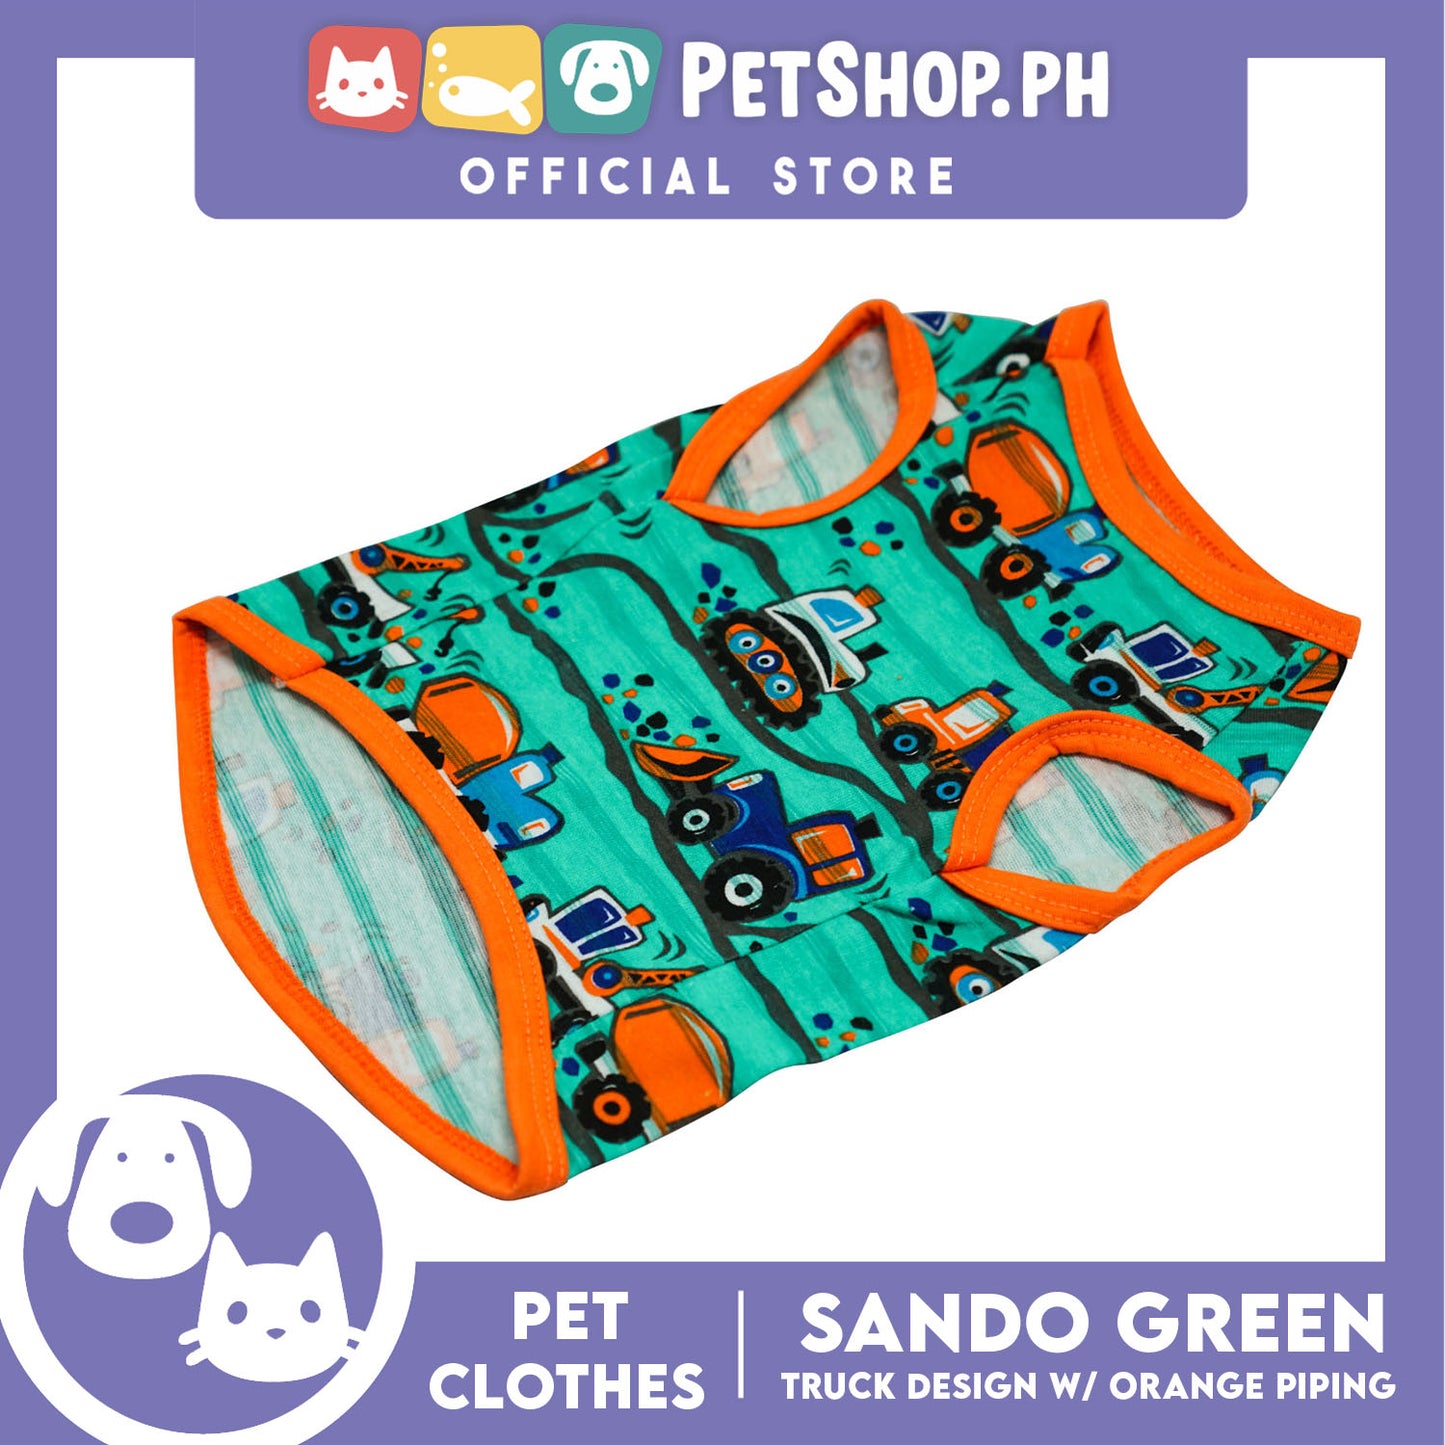 Green Pet Sando with Truck Design with Orange Piping Sleeveless (Large) for Puppy, Small Dogs and Cats